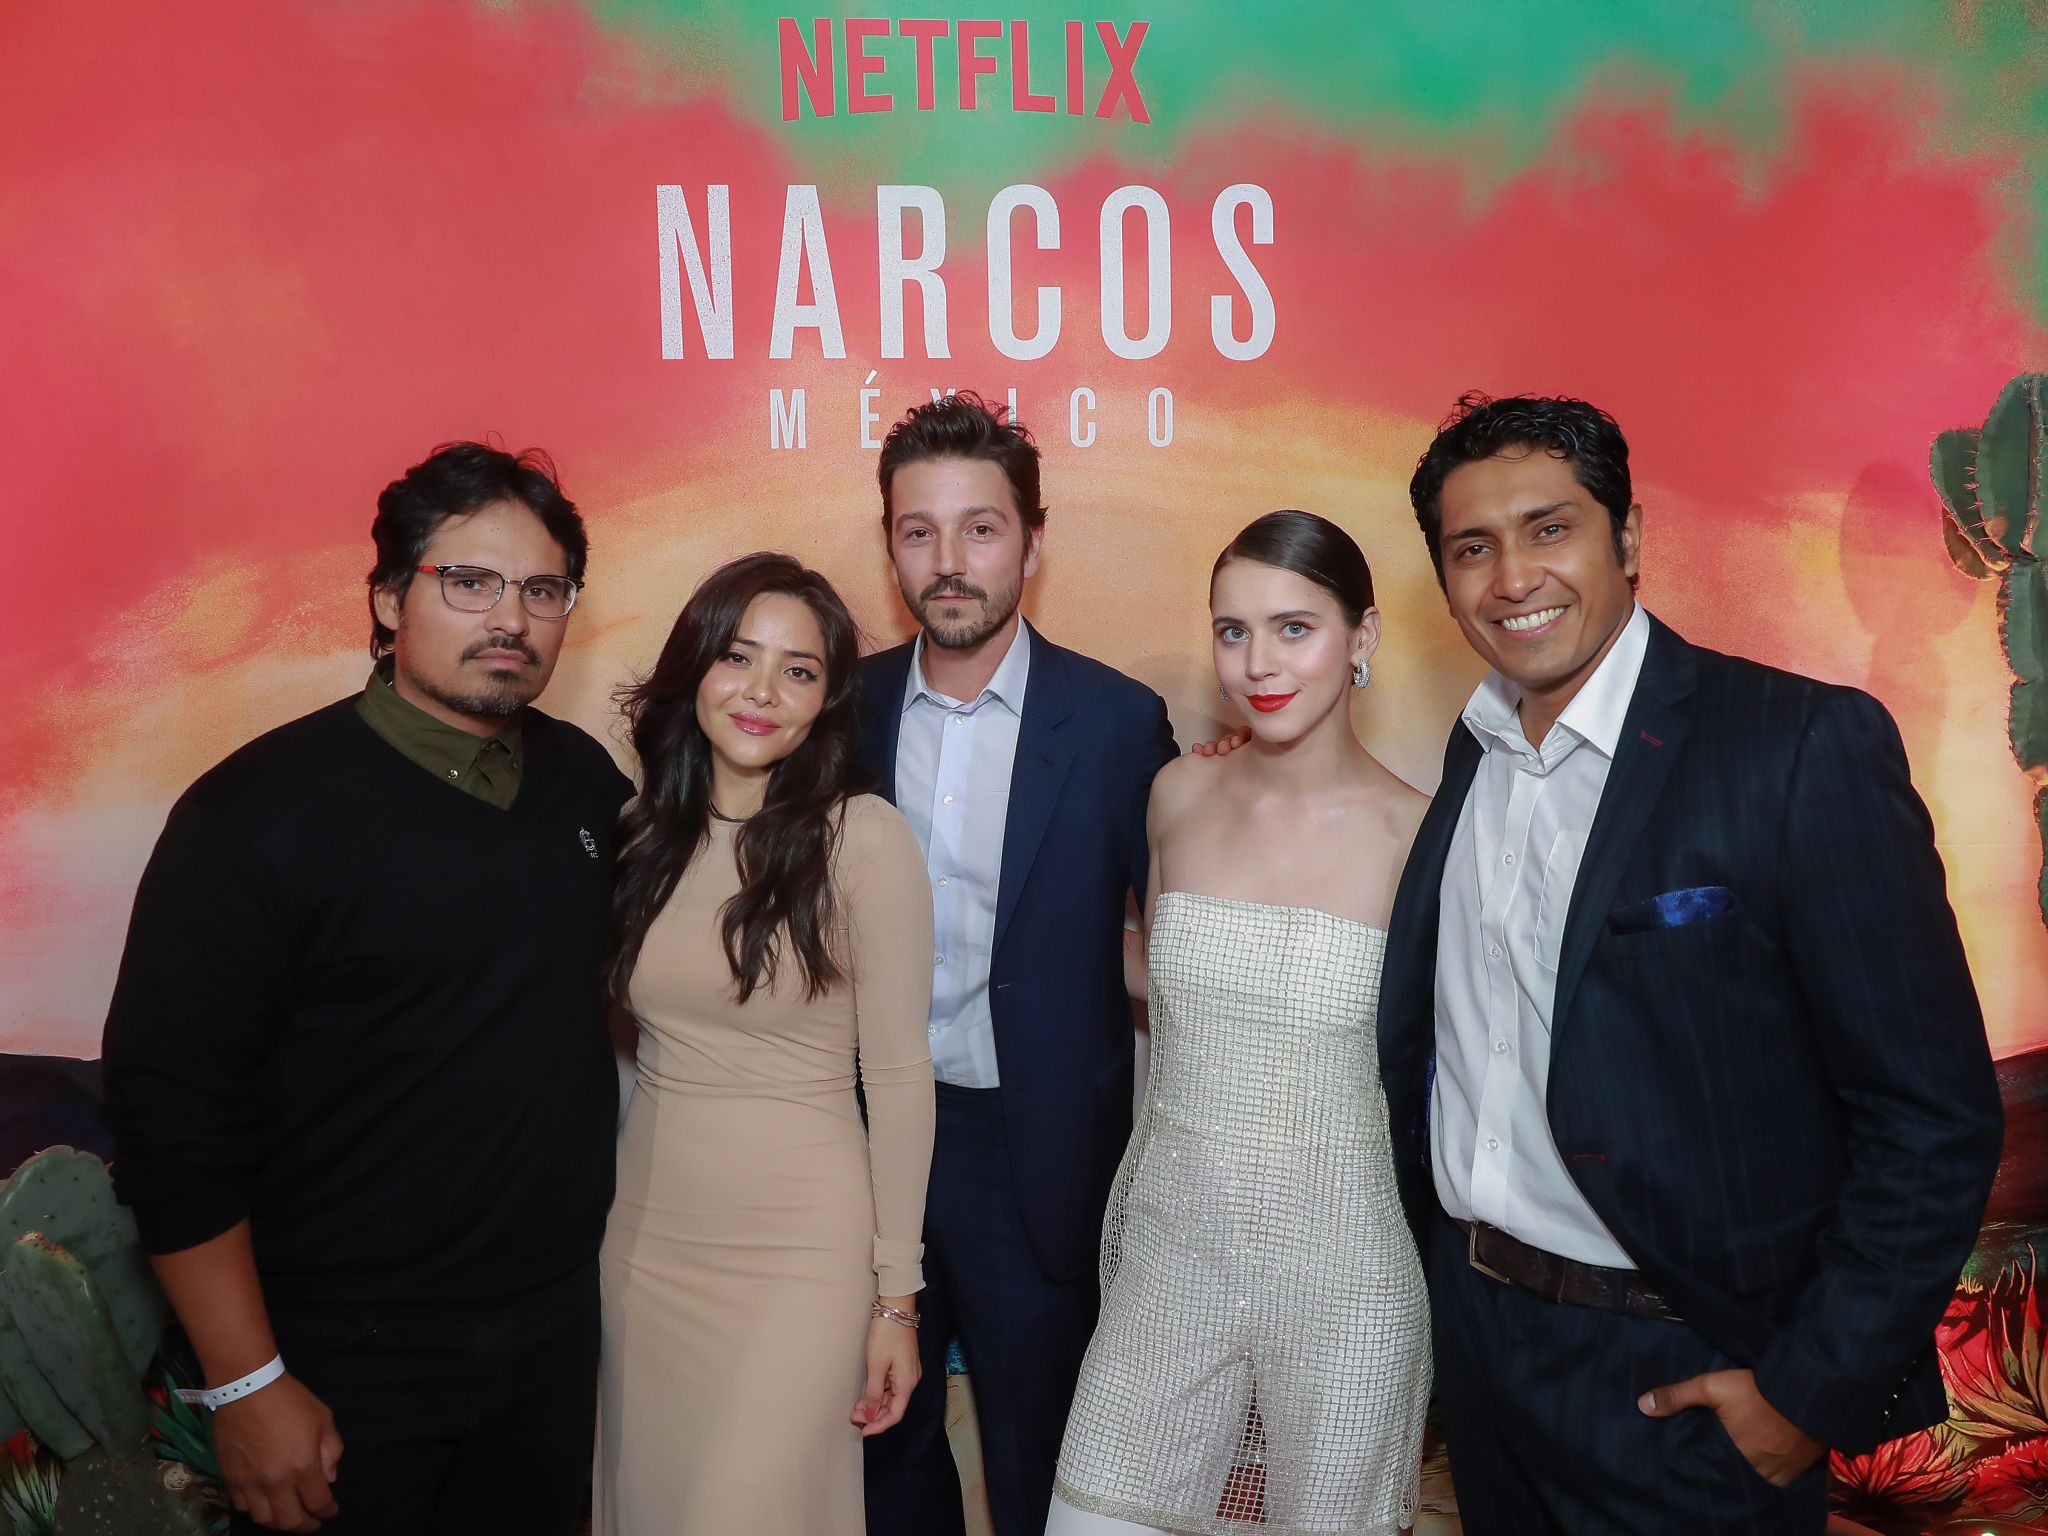 Meet the real-life people behind 'Narcos: Mexico'